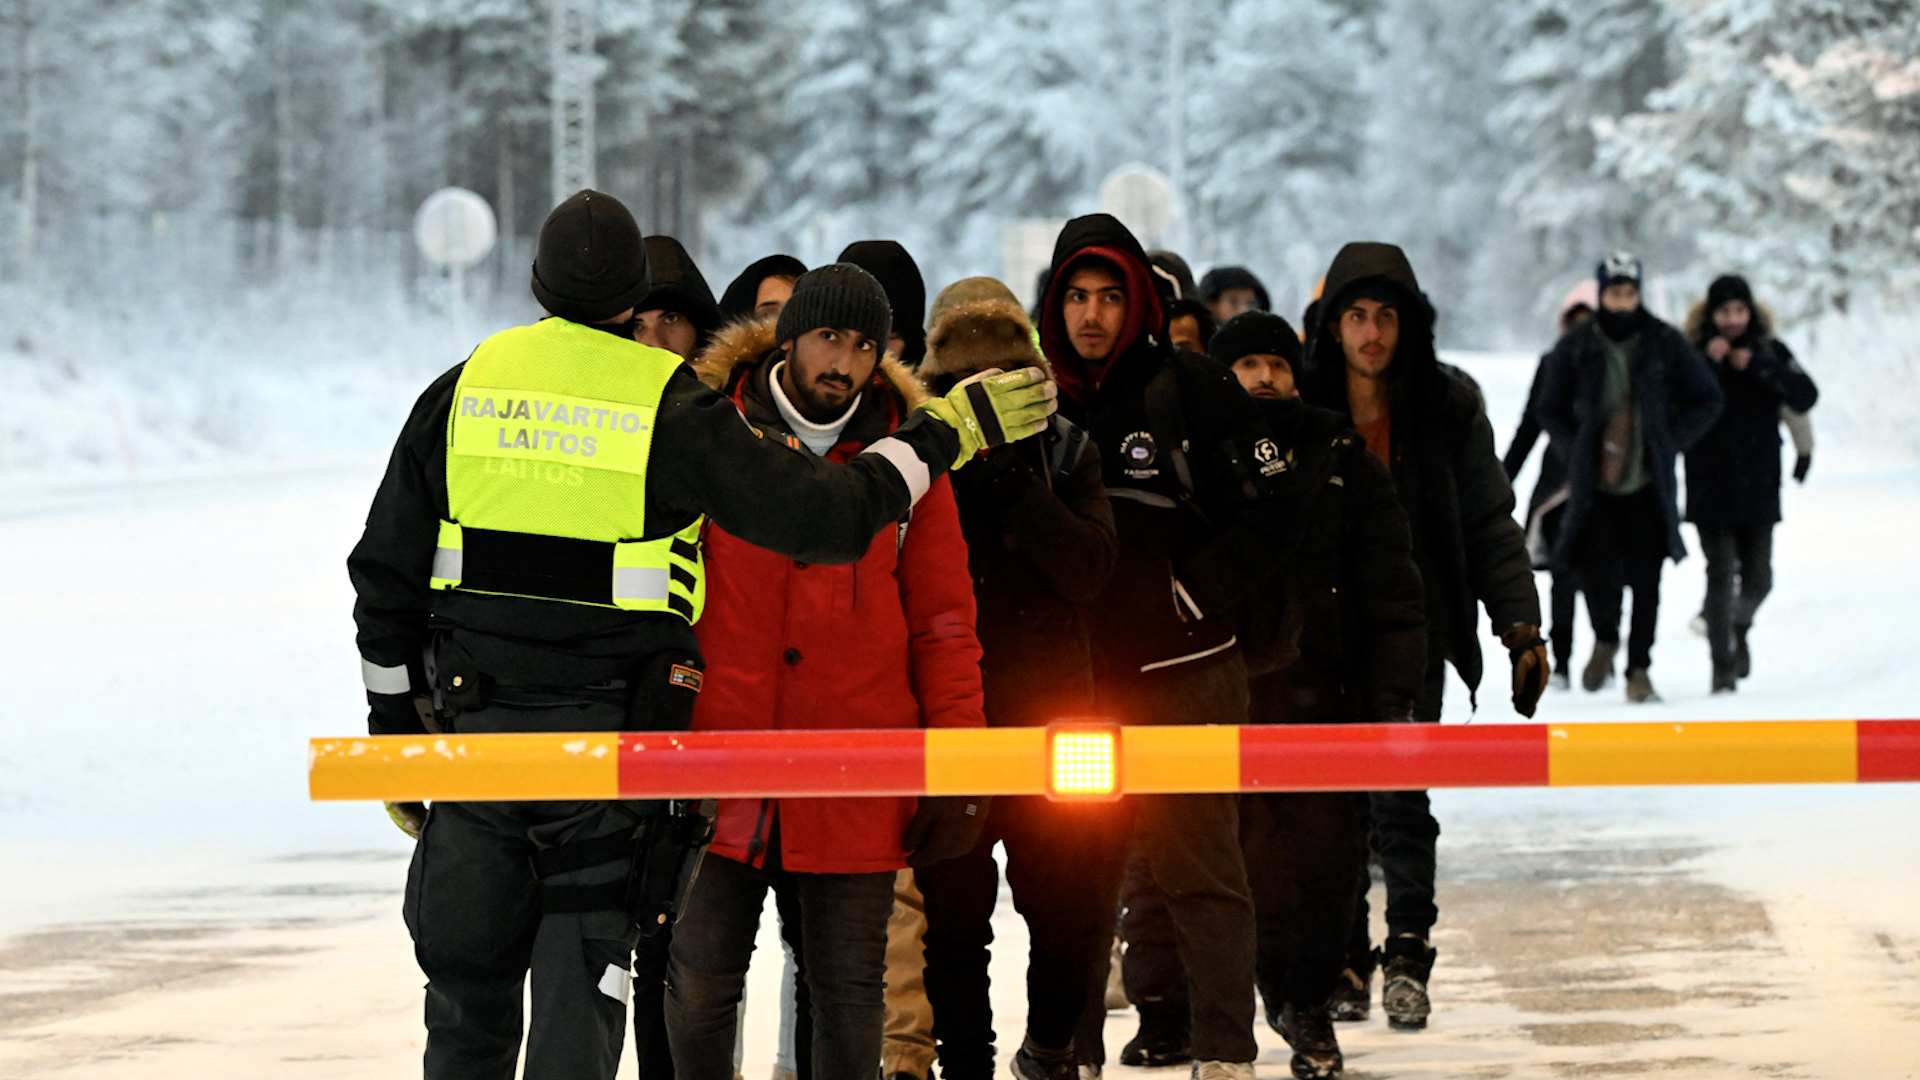 Finnish Prime Minister Petteri Orpo has called on Russia to cease sending asylum seekers to Finland, characterizing it as a "hybrid attack." Finland recently closed most border crossings due to an influx of over 800 migrants from nations including Afghanistan, Kenya, Morocco, Pakistan, Somalia, Syria and Yemen, and is accusing Russia of orchestrating the situation as retaliation for increased defense cooperation with the United States.